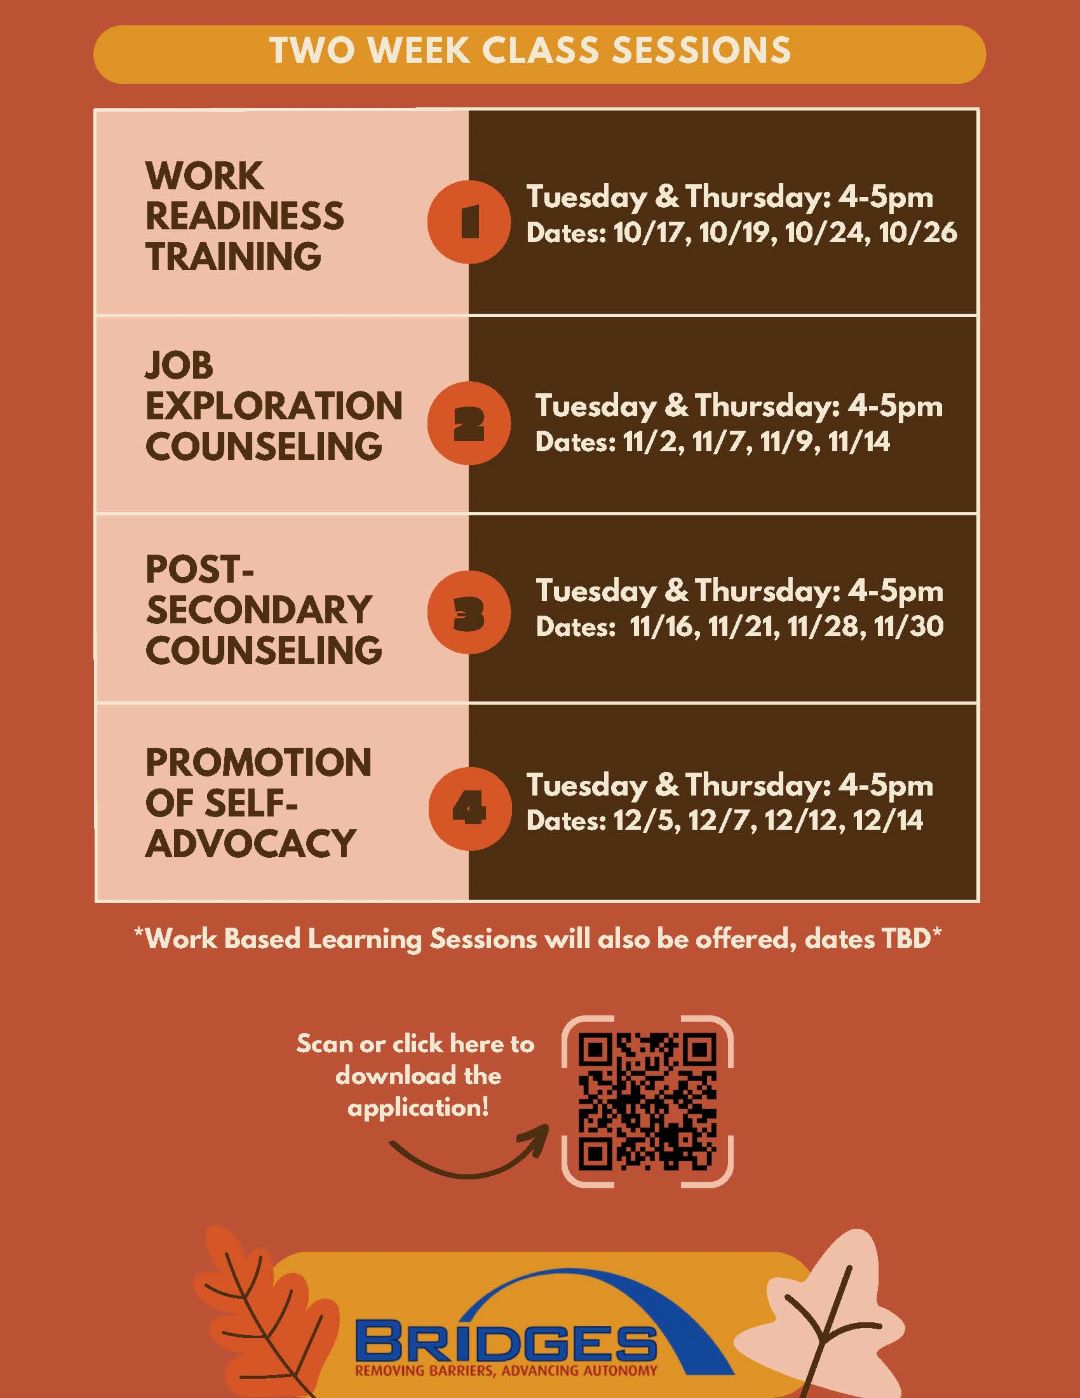 Two-week class sessions. Work readiness training, Tuesday and Thursday, 4 to 5 PM on October 17, 19, 24, and 26. Job exploration counseling, Tuesday and Thursday, 4 - 5 PM on November 2, 7, 9 and 14. Post-secondary counseling, Tuesday and Thursday, 4 - 5 PM on November 16, 21, 28 and 30. Promotional of self-advocacy, Tuesday and Thursday, 4 - 5 PM on December 5, 7, 12, and 14. Work based learning sessions will also be offered, dates TBD. Scan or click here to download the application.